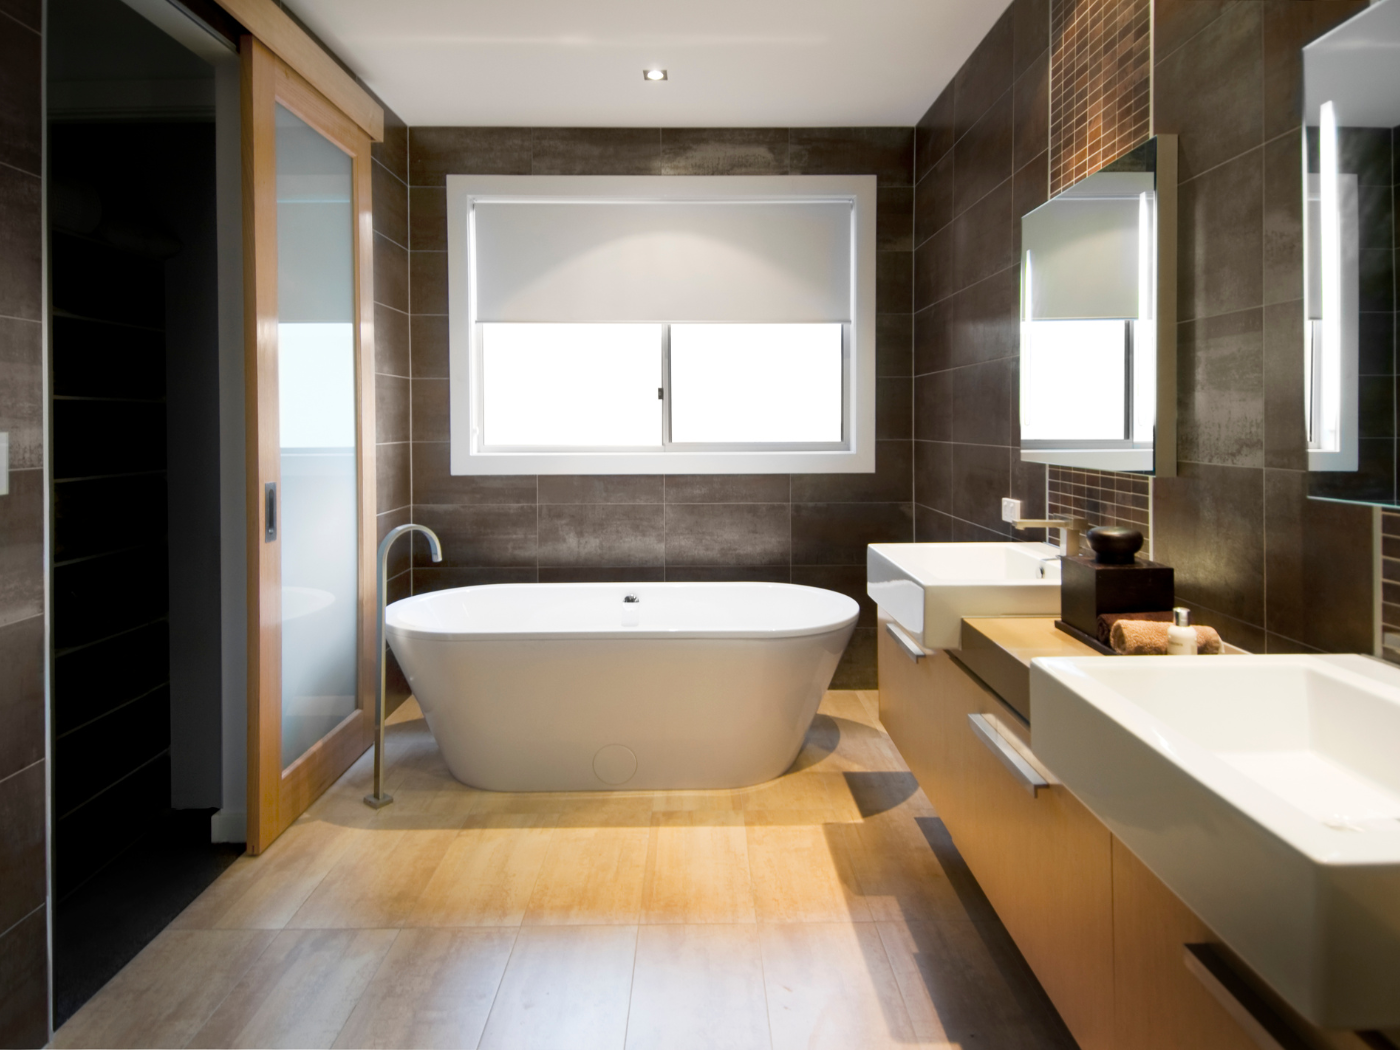 How to Save on Your Luxury Bathroom Remodel